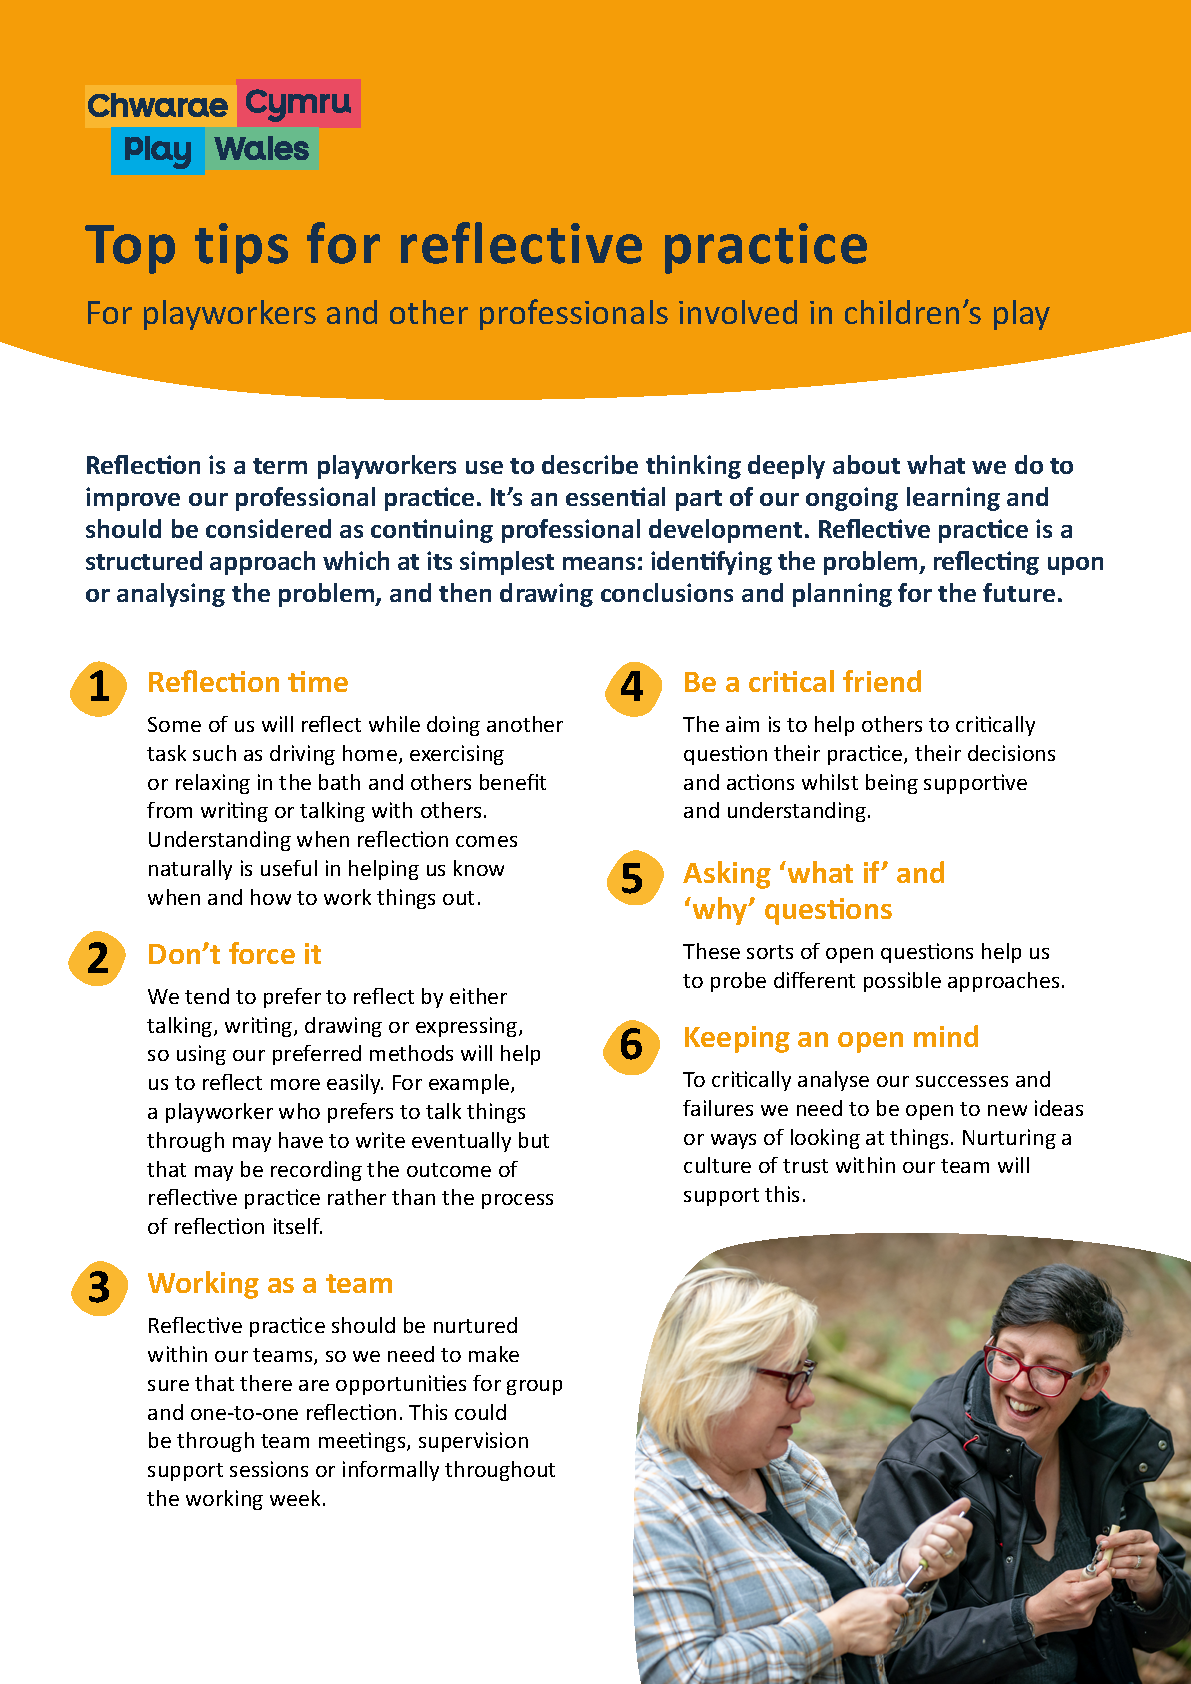 Top tips for reflective practice